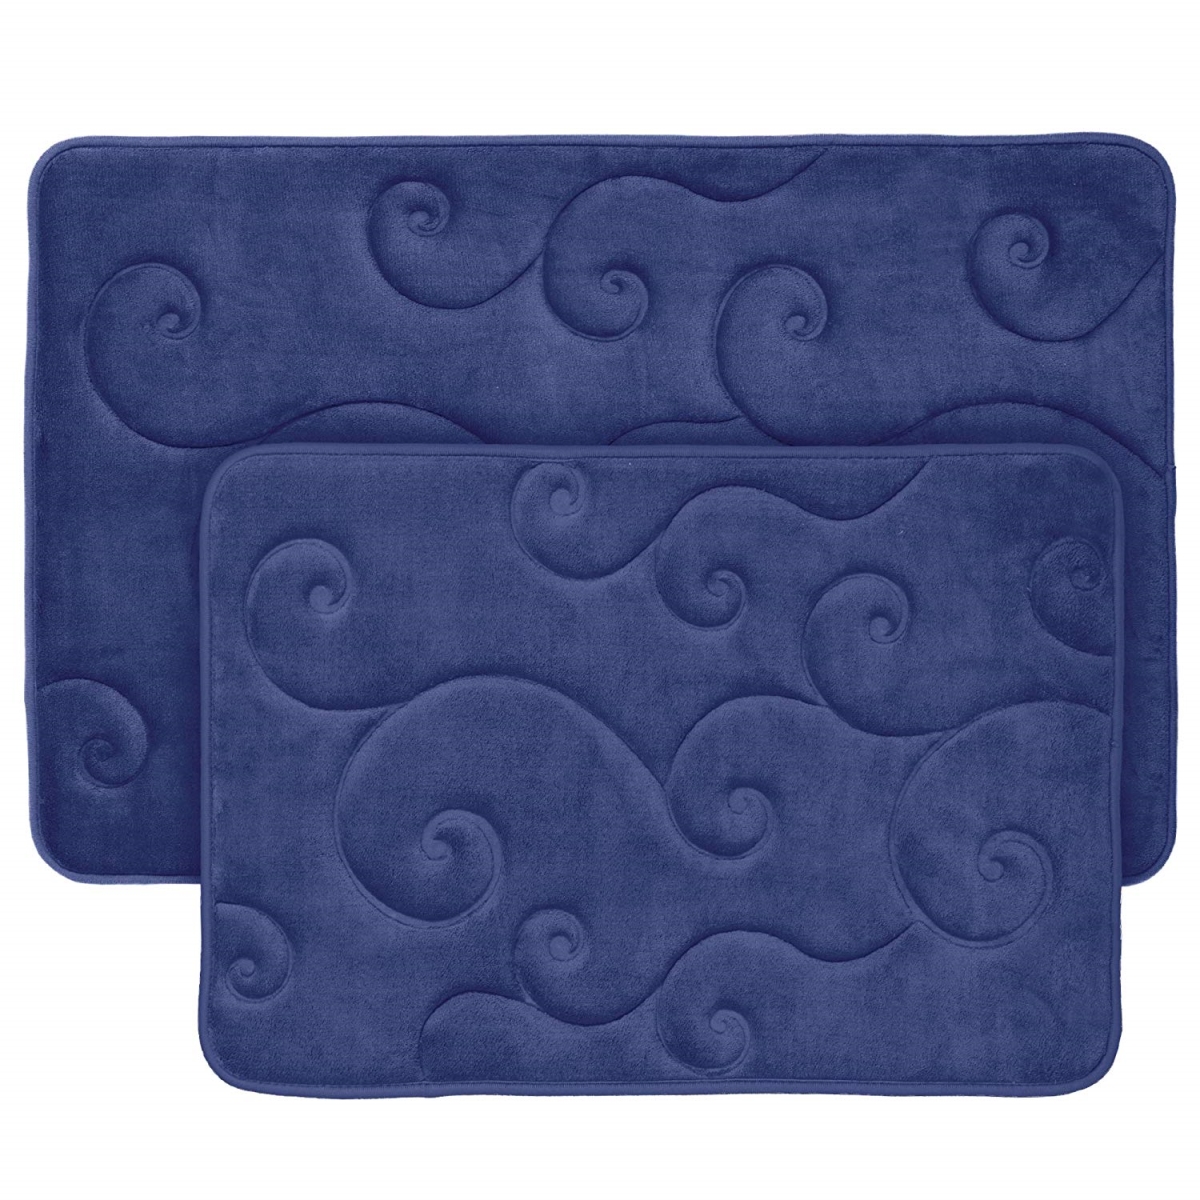 Picture of Bedford Home 67A-36772 2 Piece Memory Foam Bath Mat Set by Coral Fleece Embossed Pattern - Navy